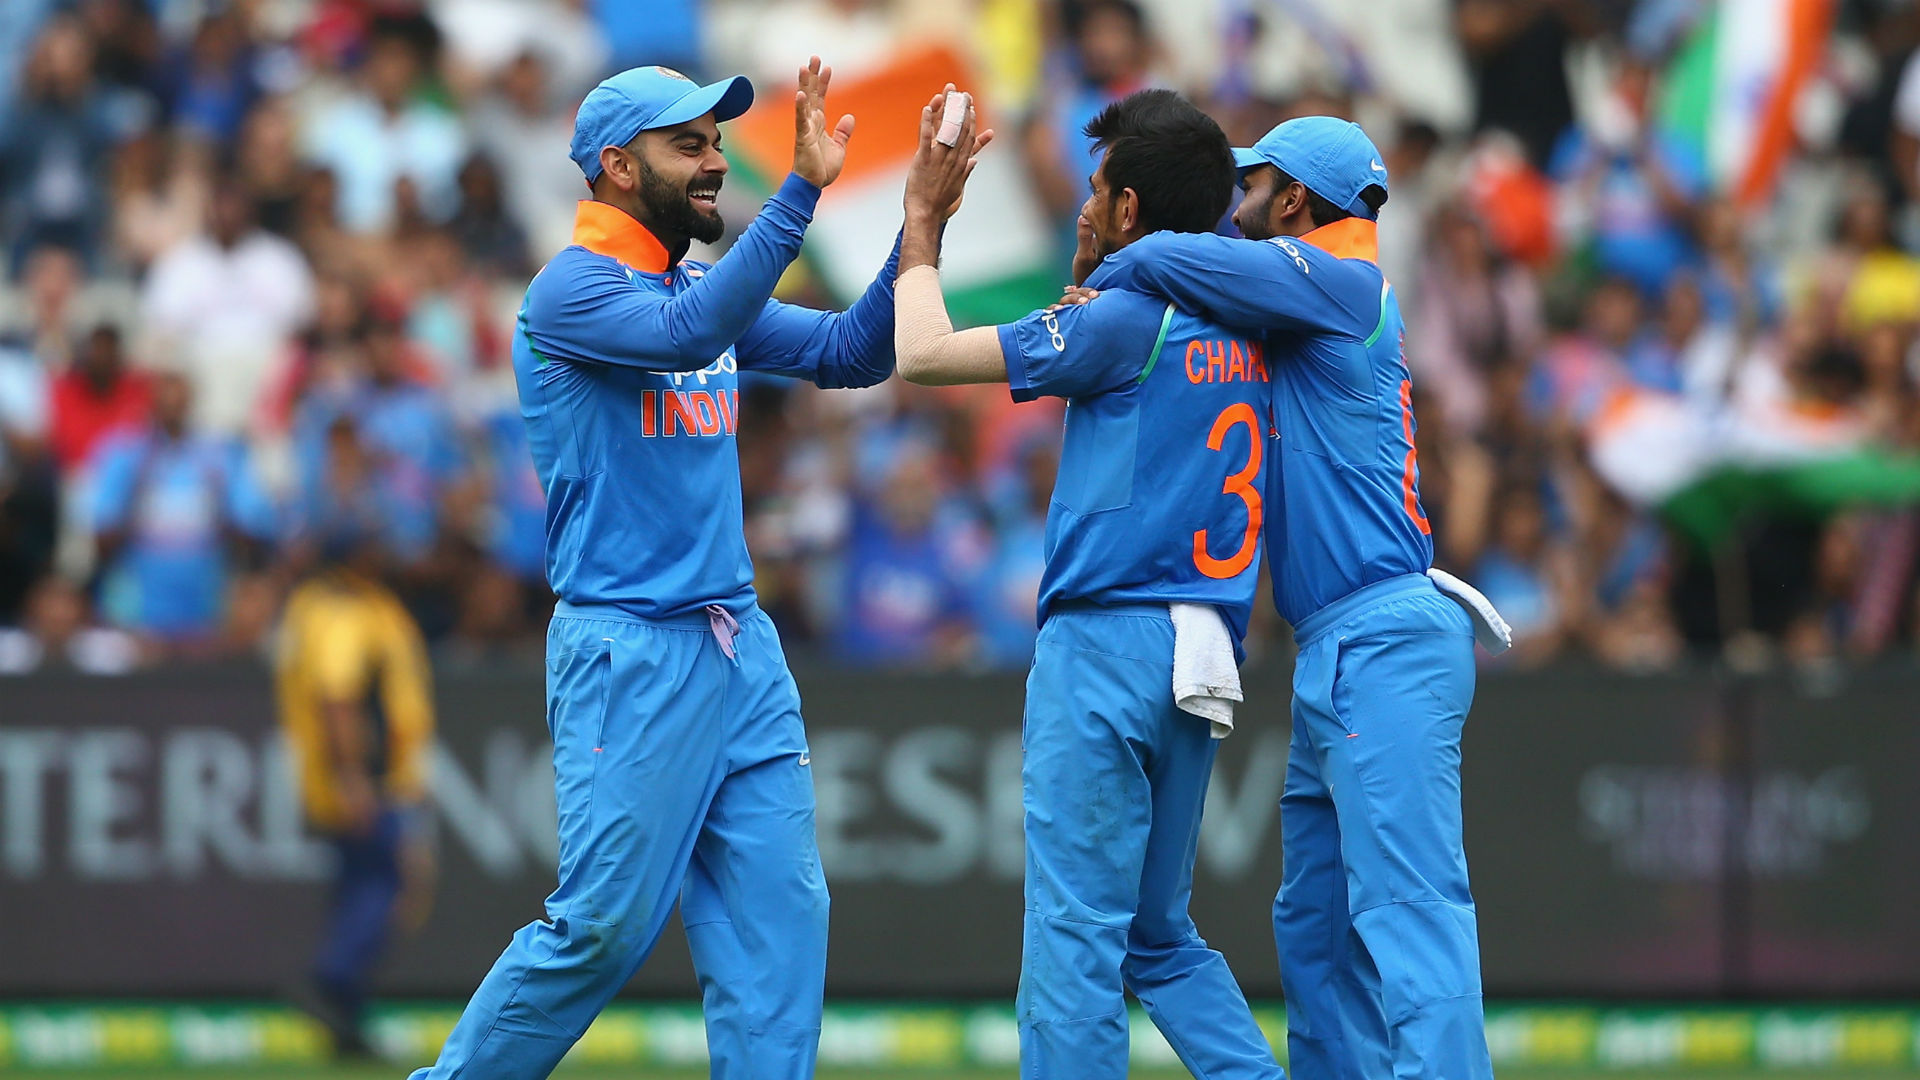 Yuzvendra Chahal and MS Dhoni starred as India sealed a 2-1 one-day series win over Australia with a seven-wicket triumph.